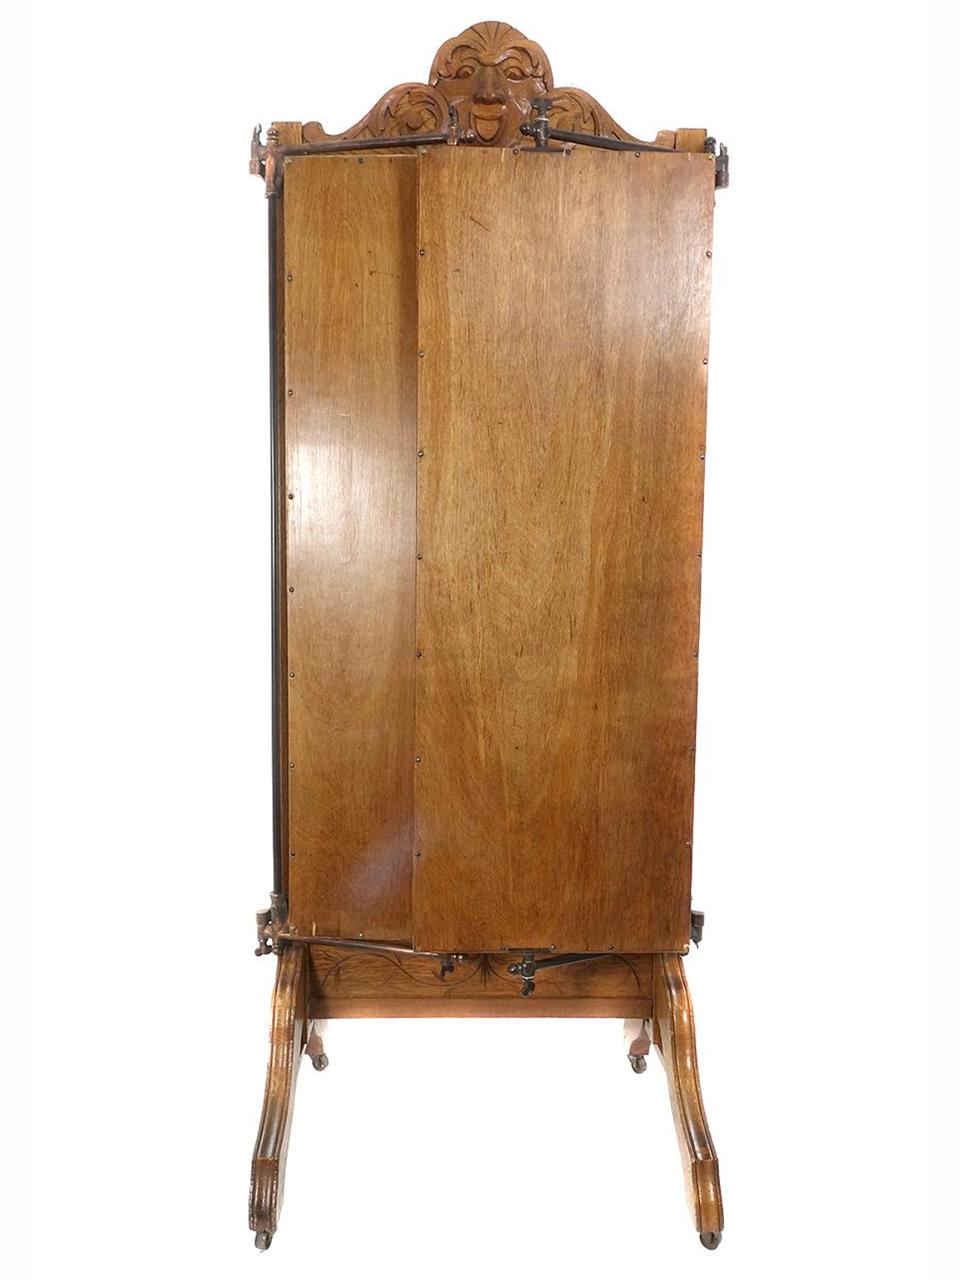 Empire Revival Haberdasher's Triple Cheval Dressing Mirror For Sale